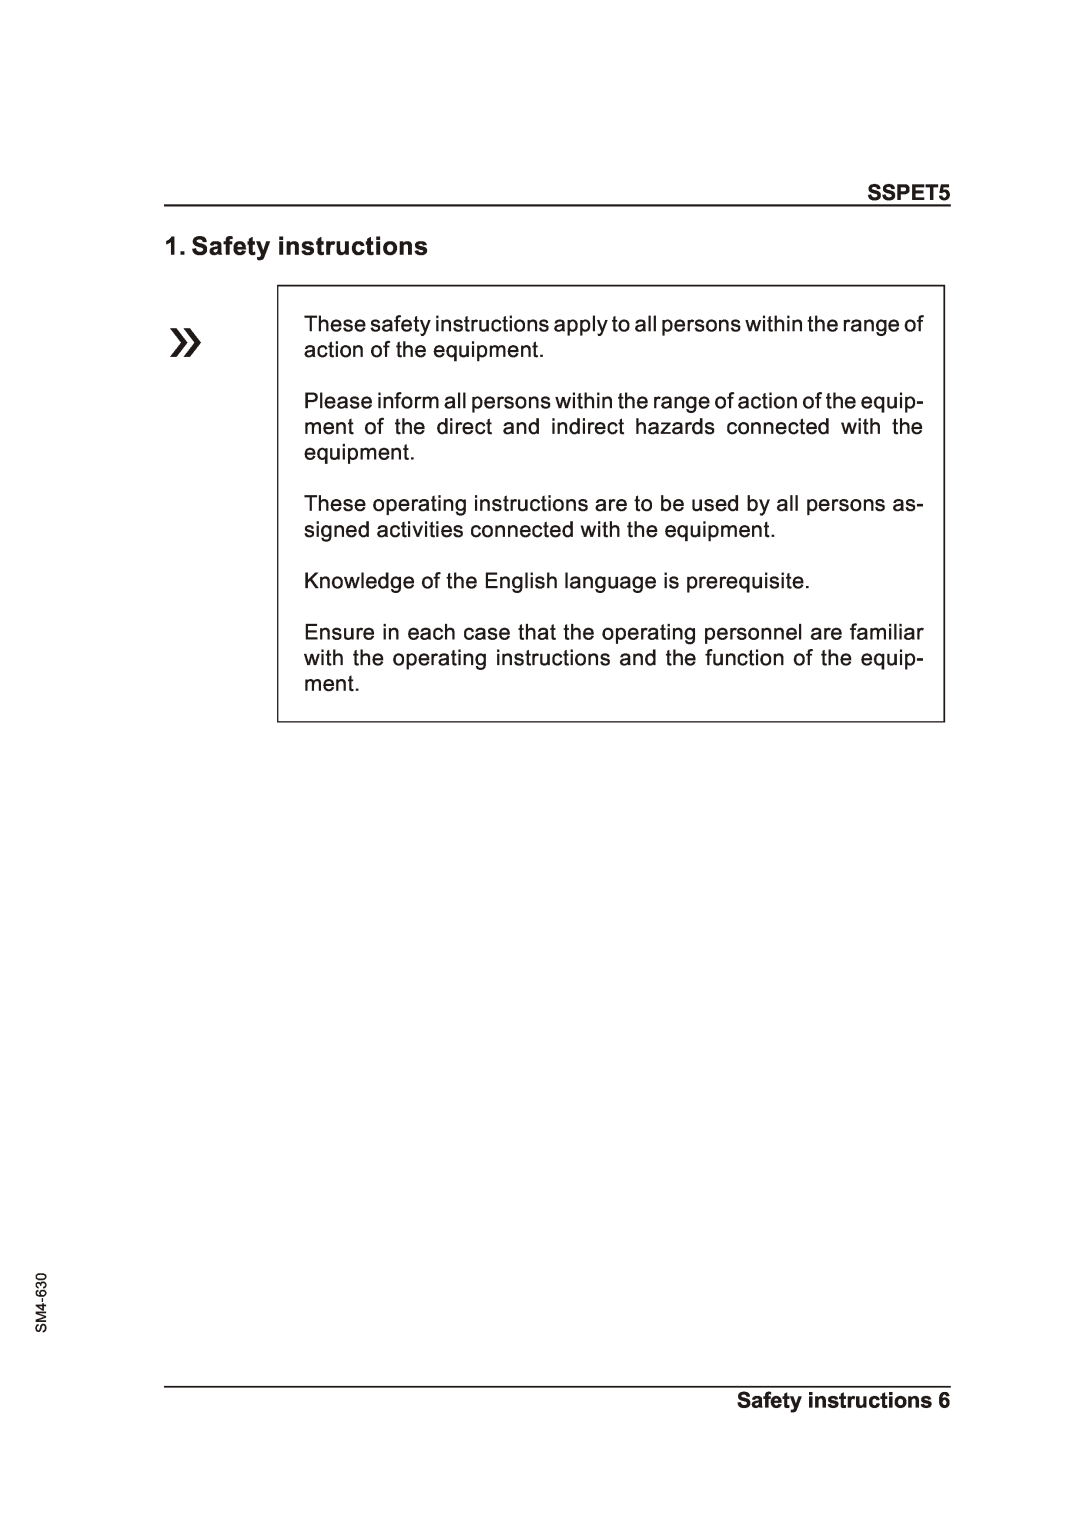 Sterling SSPET 5 operating instructions Safety instructions, SSPET5 